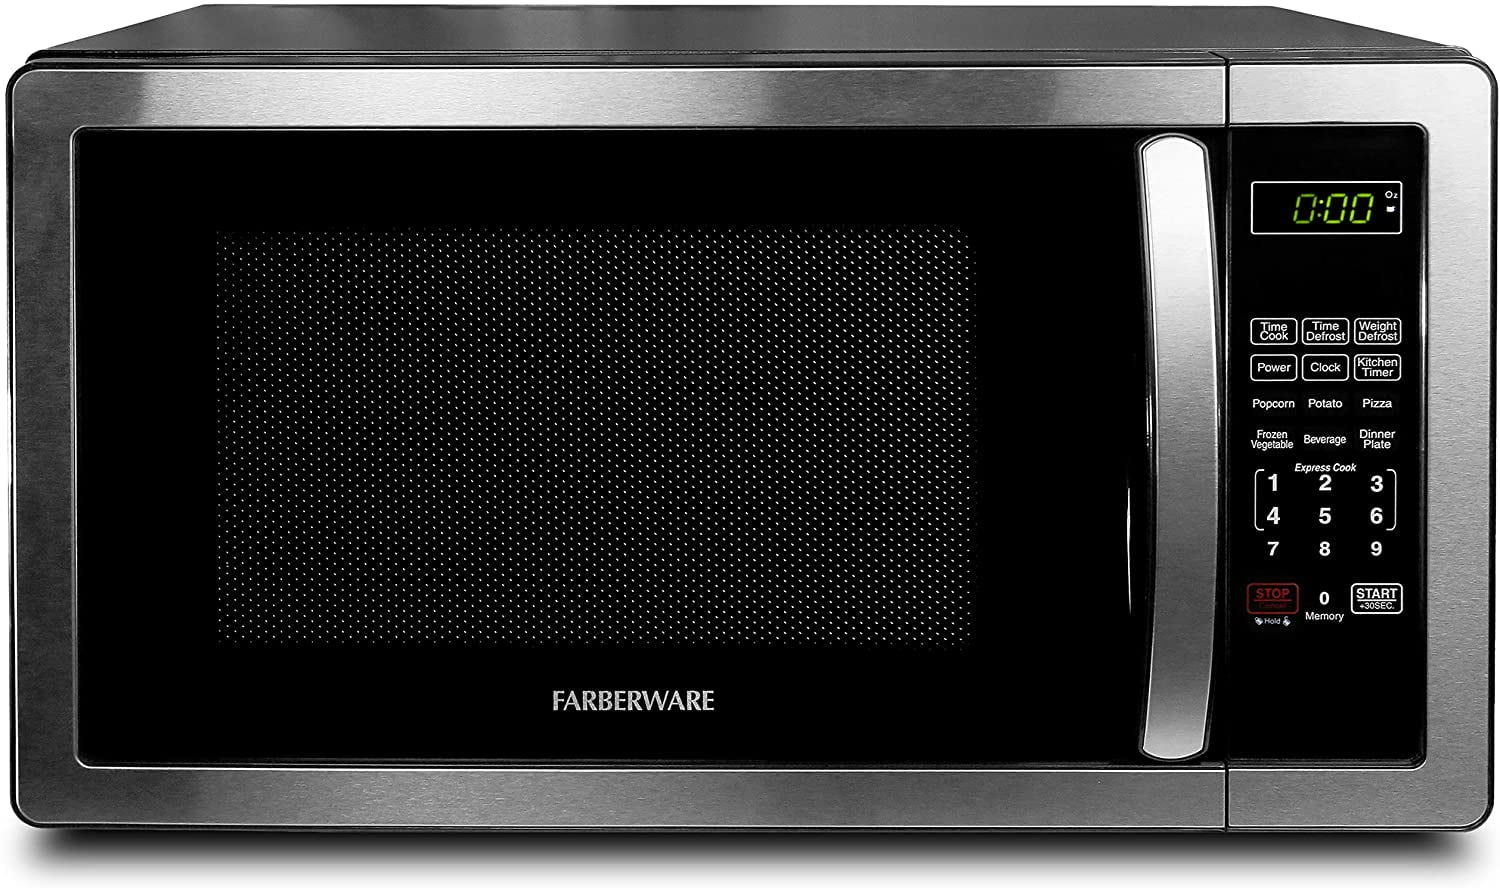  Farberware Countertop Microwave 700 Watts, 0.7 cu ft - Microwave  Oven With LED Lighting and Child Lock - Perfect for Apartments and Dorms -  Easy Clean Stainless Steel: Home & Kitchen